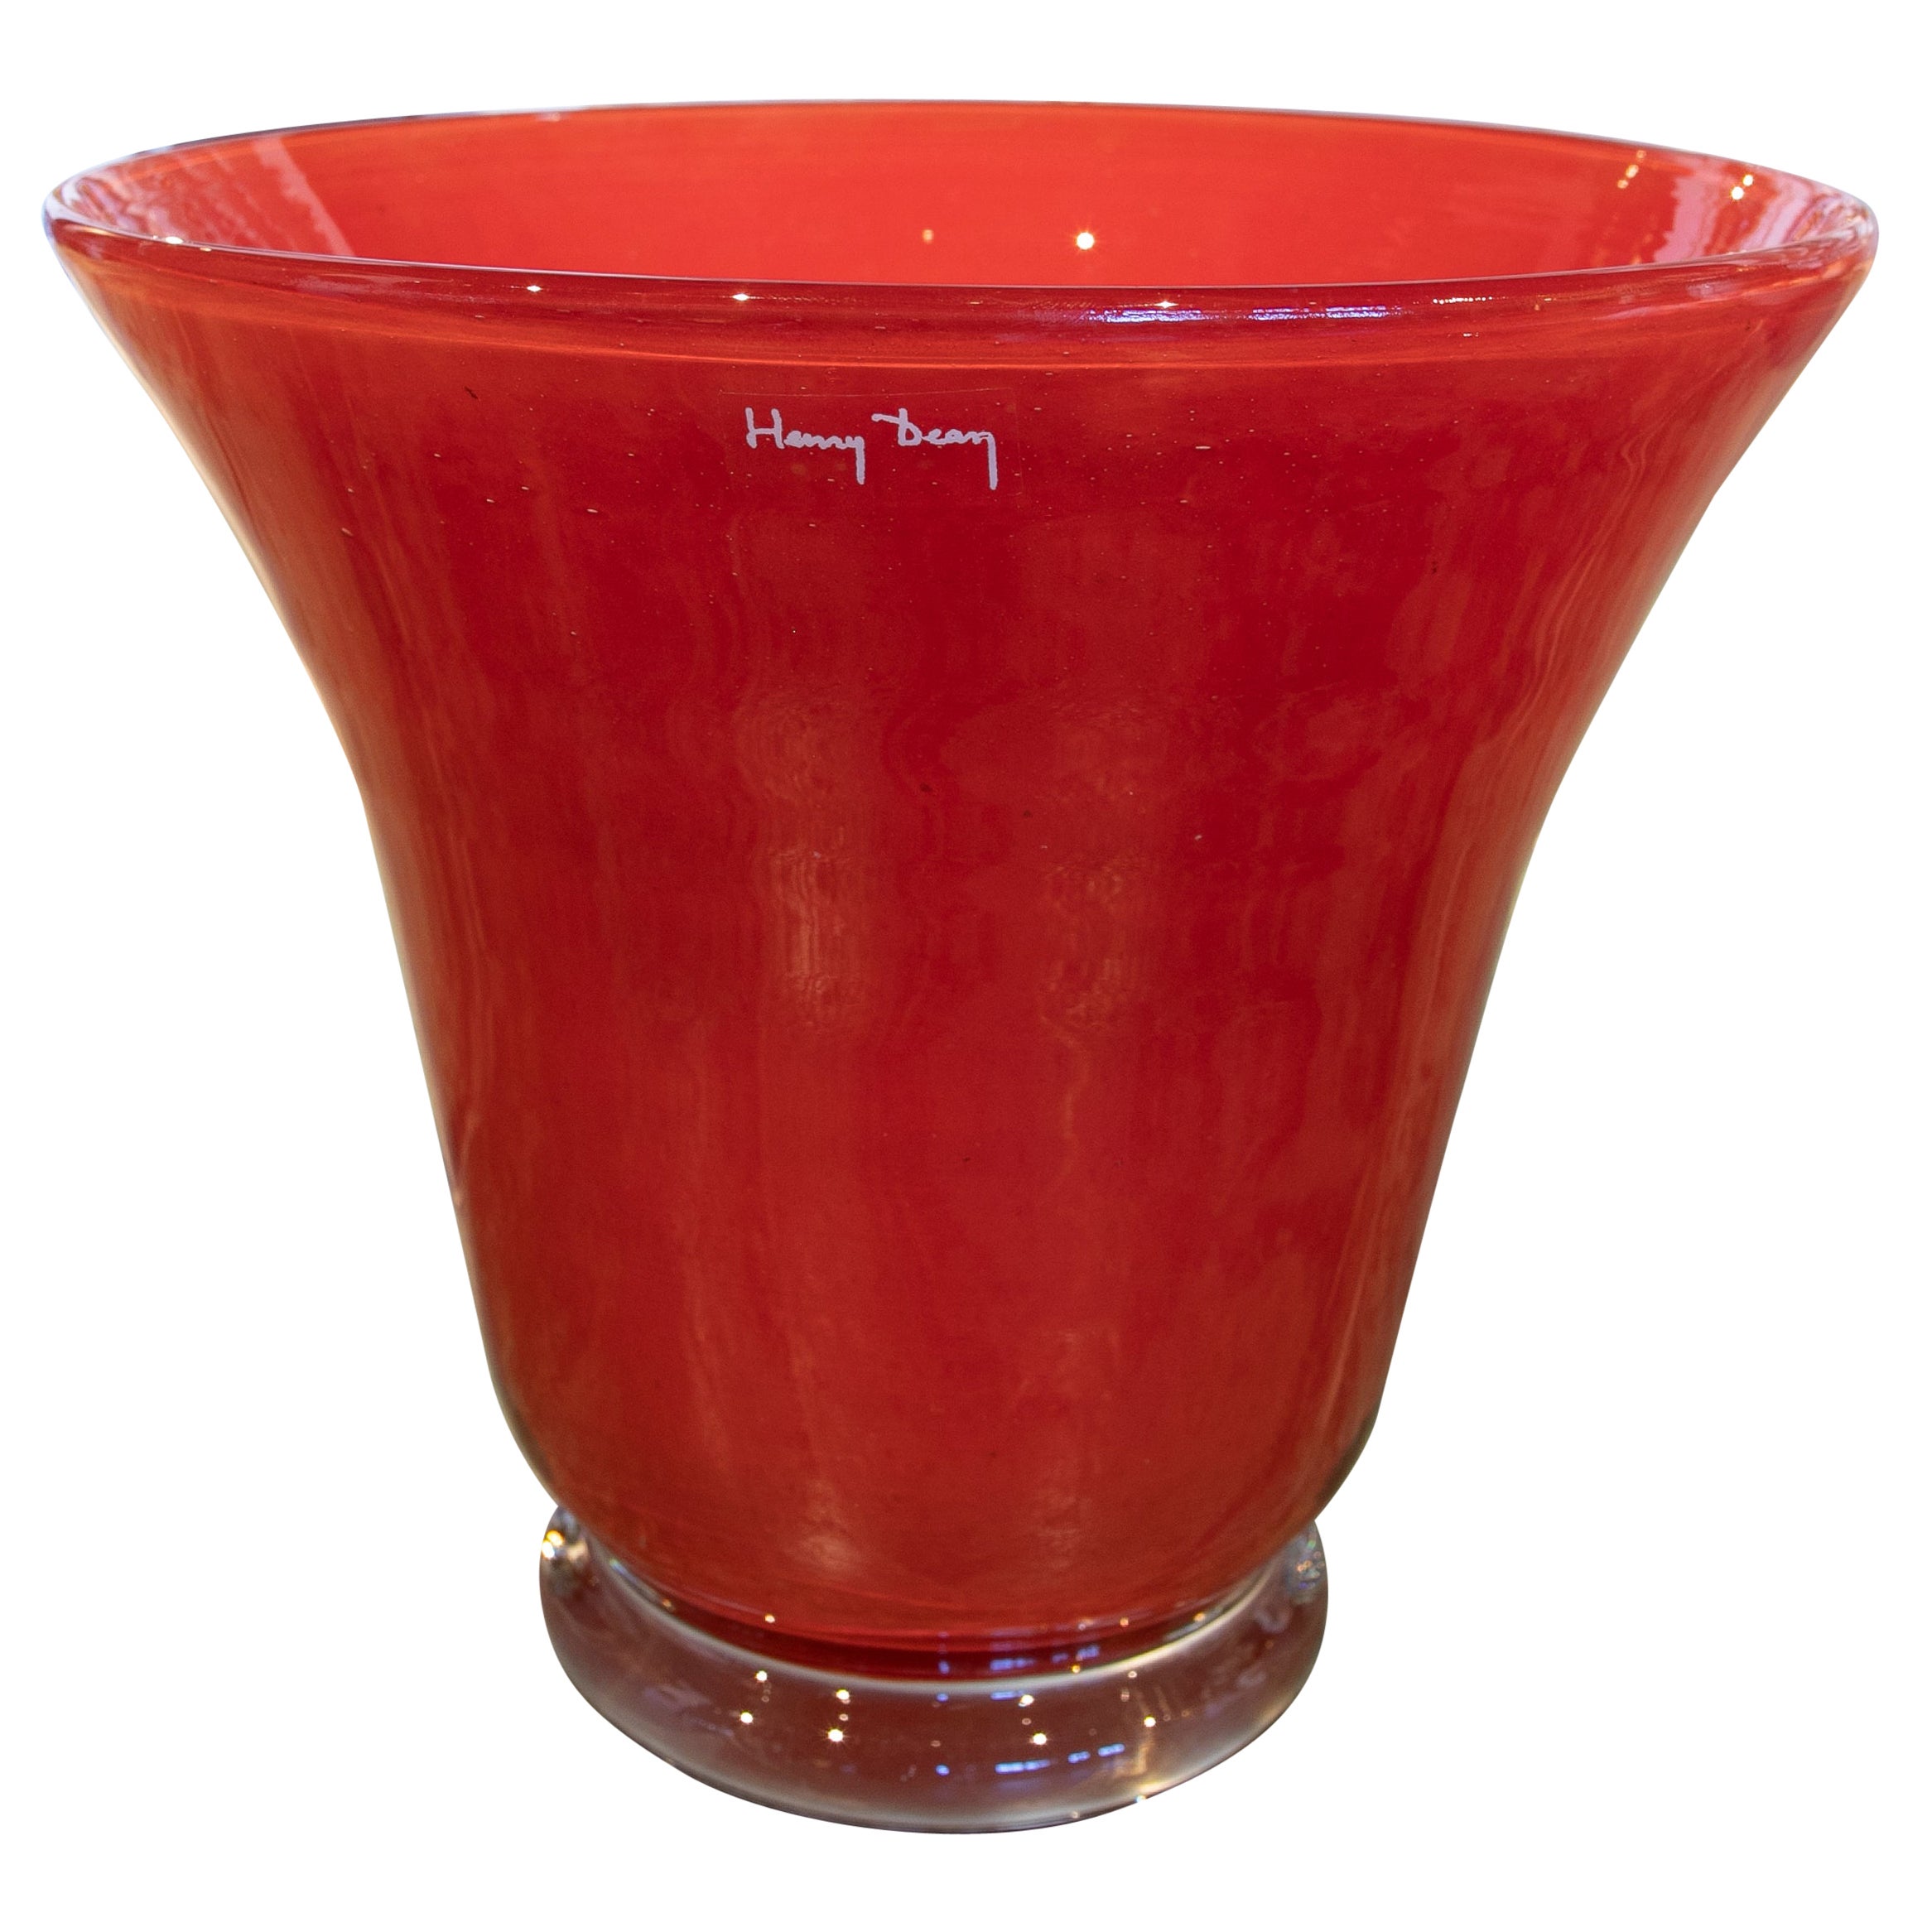 Handmade Red Glass Vase Signed by Henry Dean For Sale